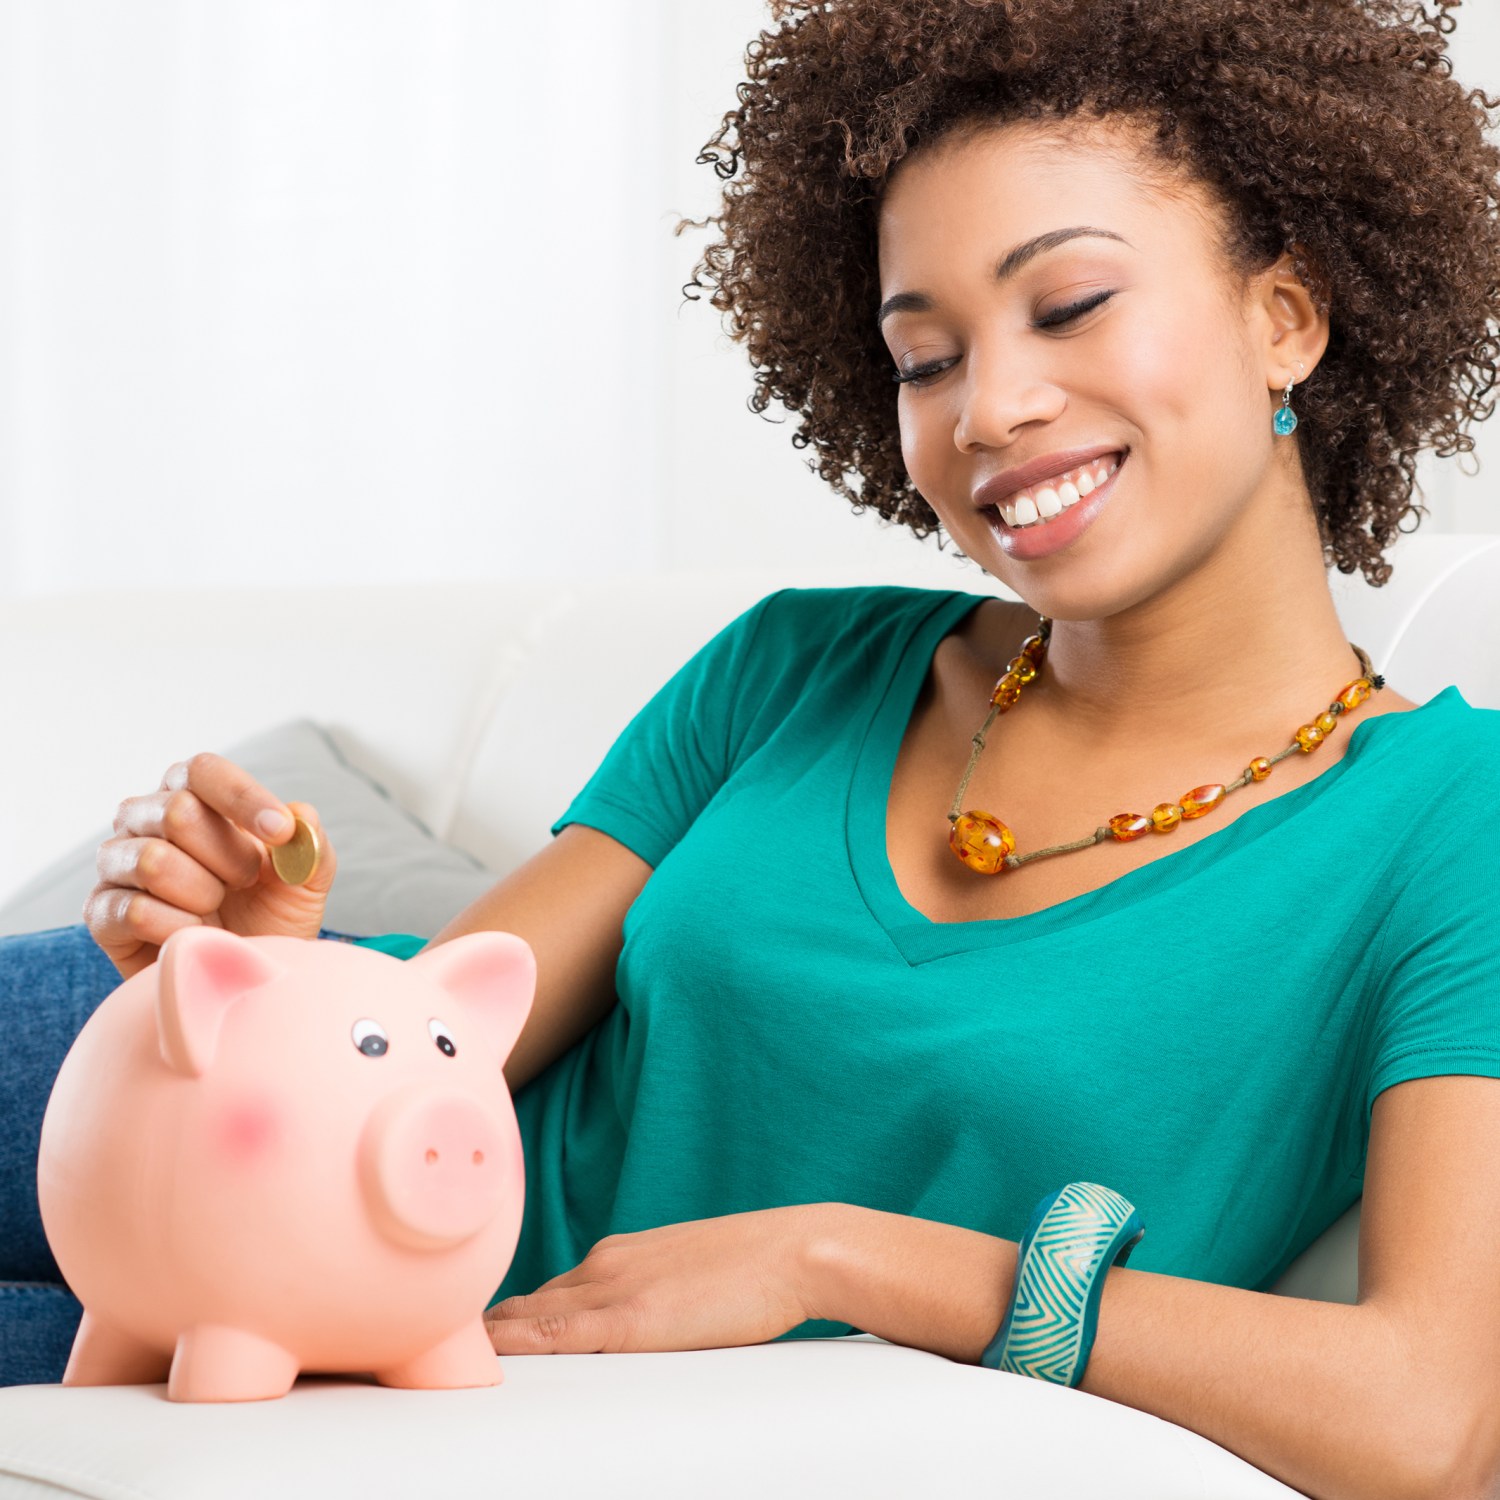 Woman sitting on a couch with a piggy bank